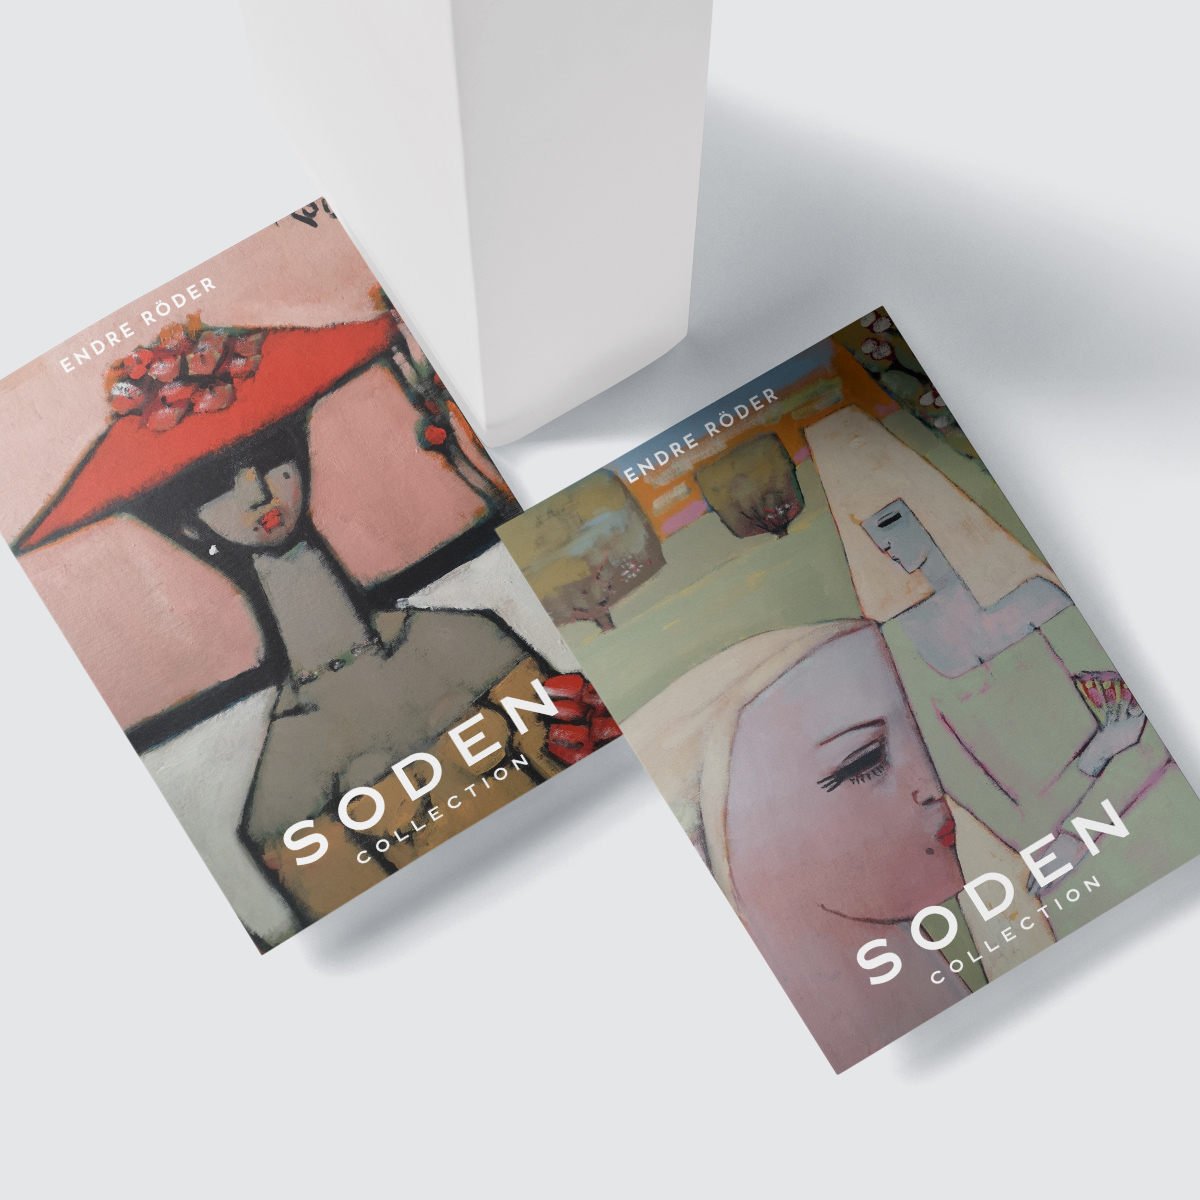 The Soden Collection brochure